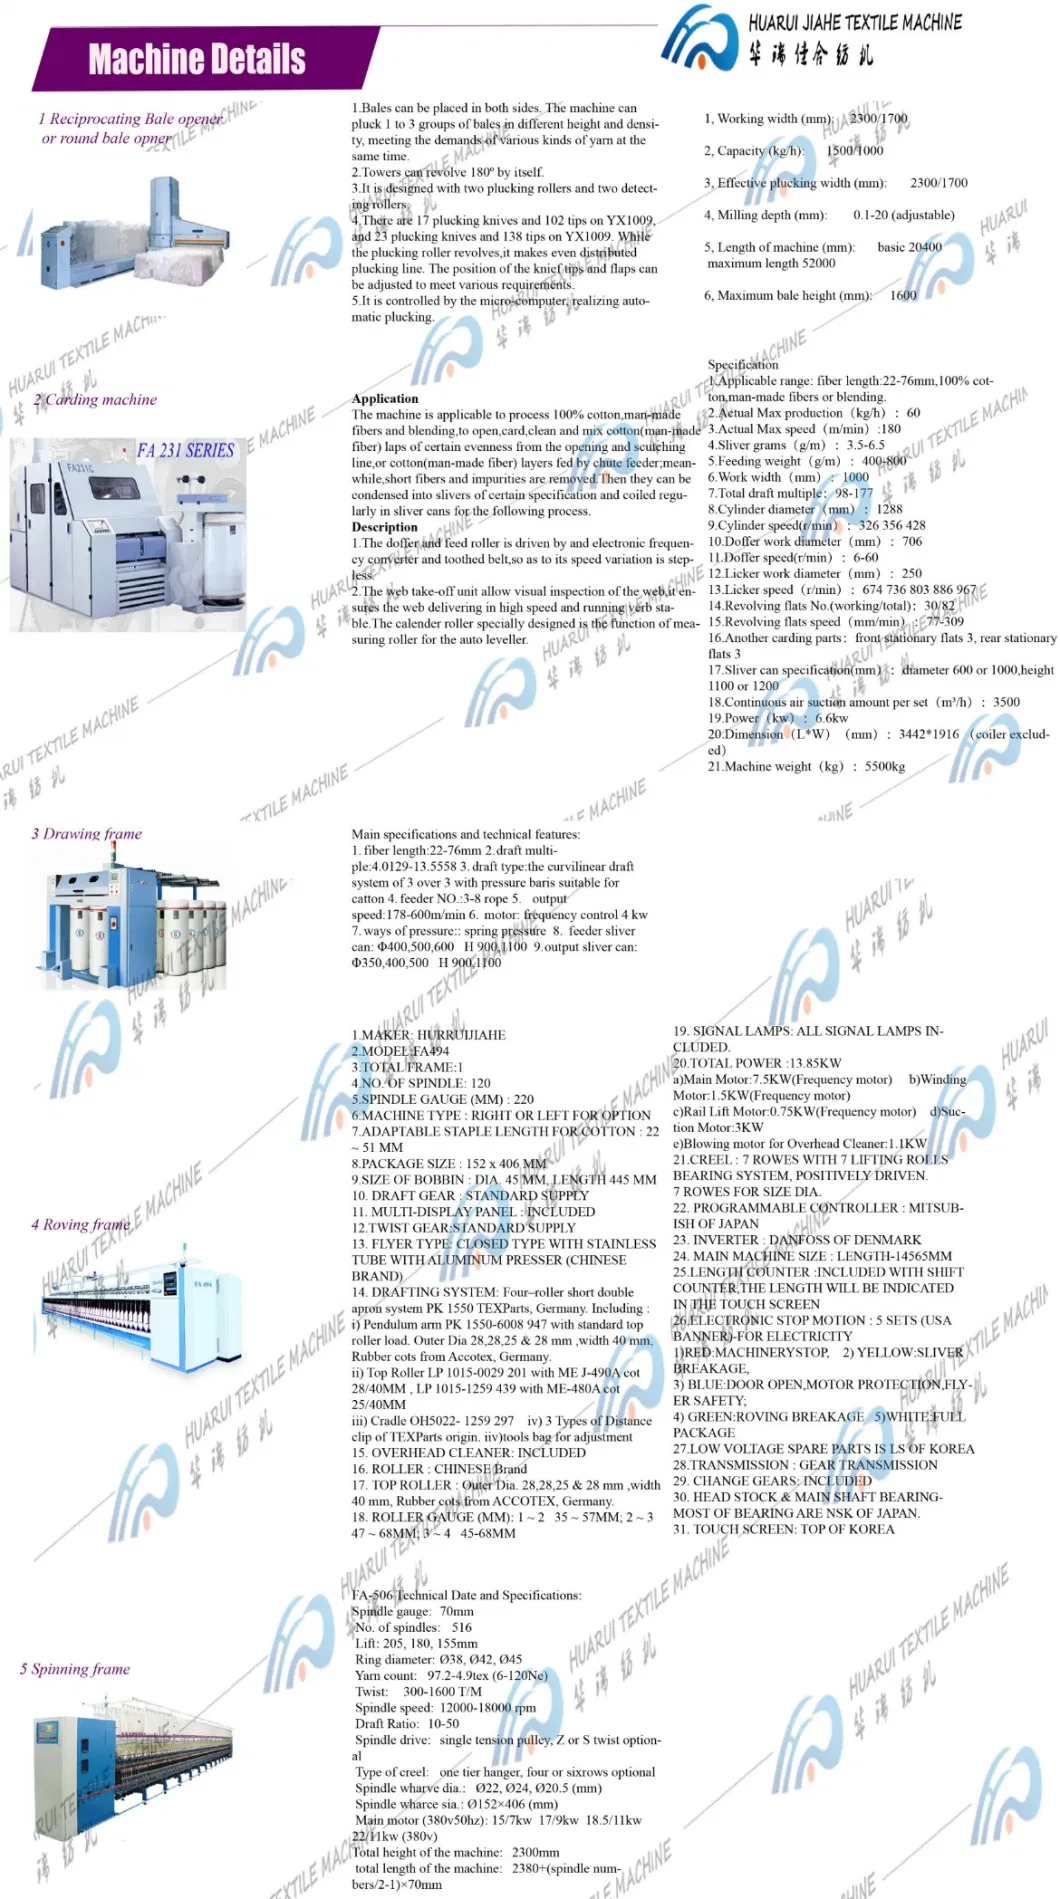 Cheese Yarn Hair Spray for Dyeing Machine Energy Saving Textile and Fabric Finishing Dyeing Machine High Temperature Airflow Atomization Dyeing Machine